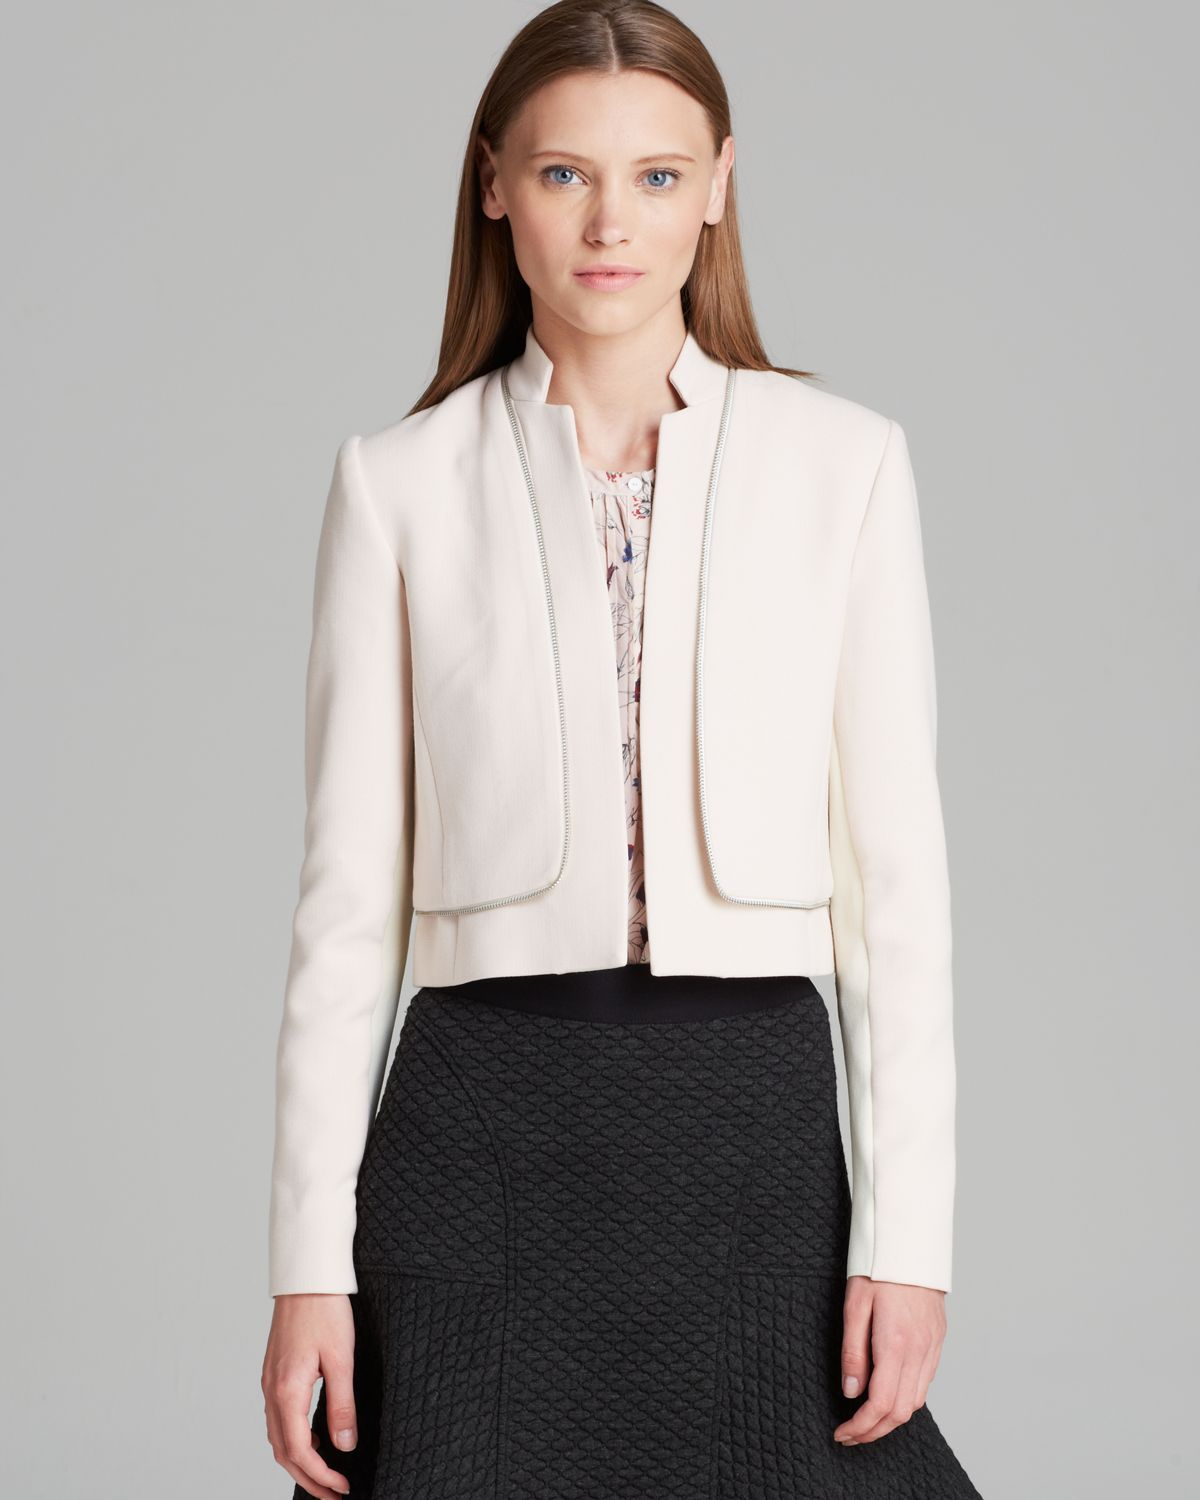 Lyst - Rebecca Taylor Jacket Double Layer Crepe Suiting in Natural